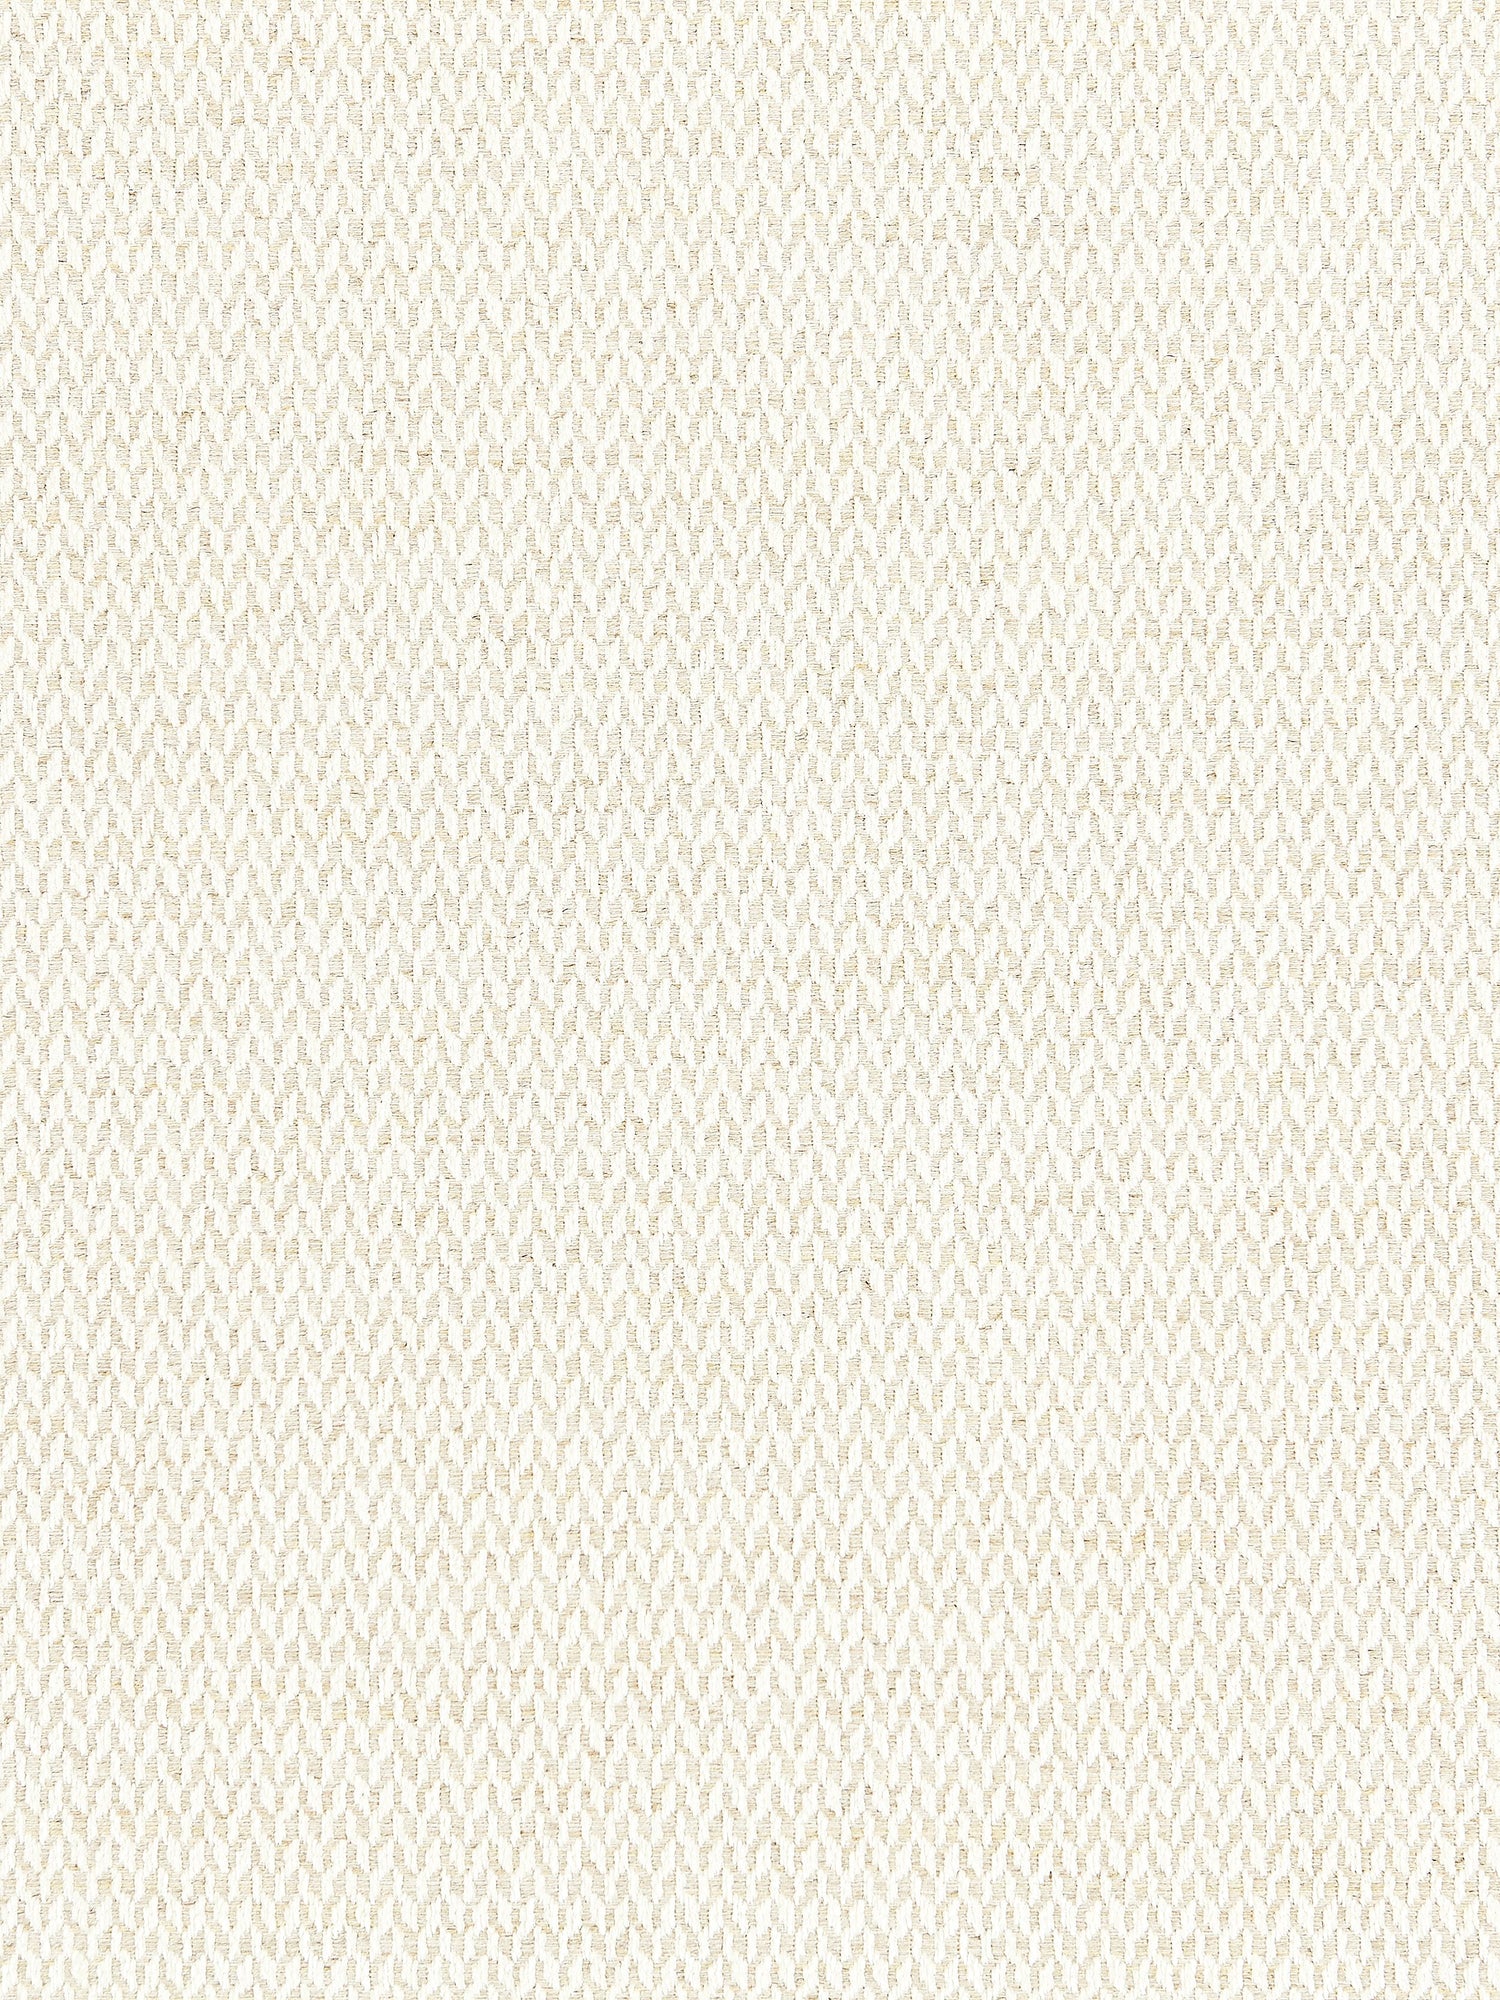 Cortona Chenille fabric in alabaster color - pattern number SC 000127104 - by Scalamandre in the Scalamandre Fabrics Book 1 collection